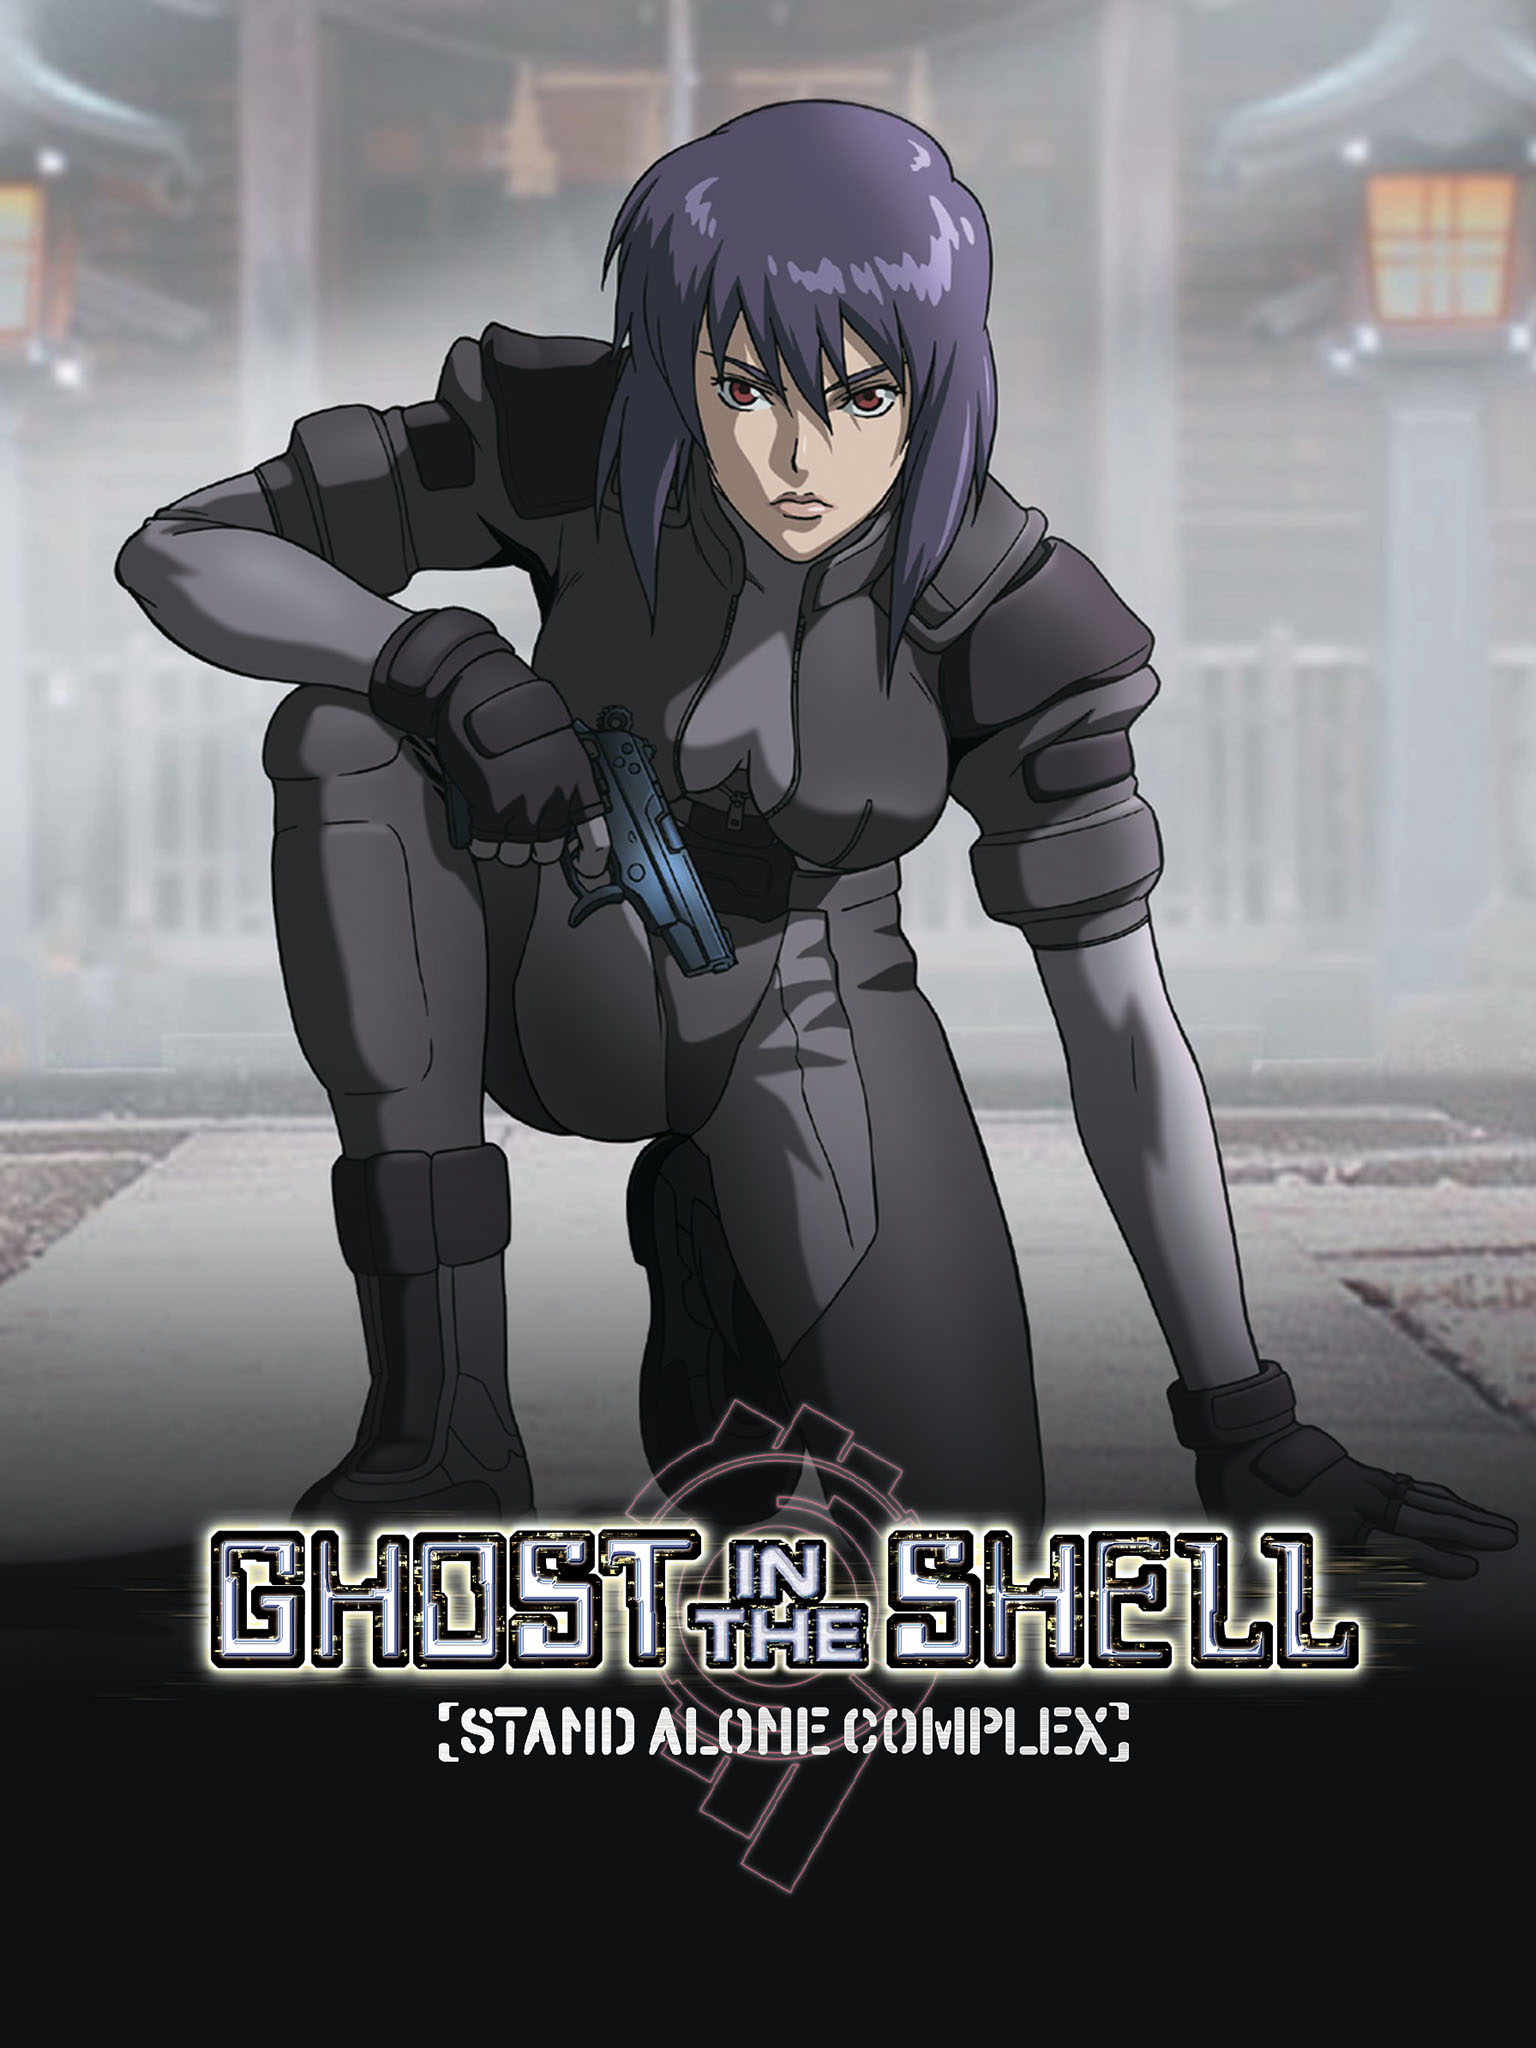 Poster Phim Vỏ bọc ma: Stand Alone Complex (Phần 1) (Ghost in the Shell: Stand Alone Complex (Season 1))